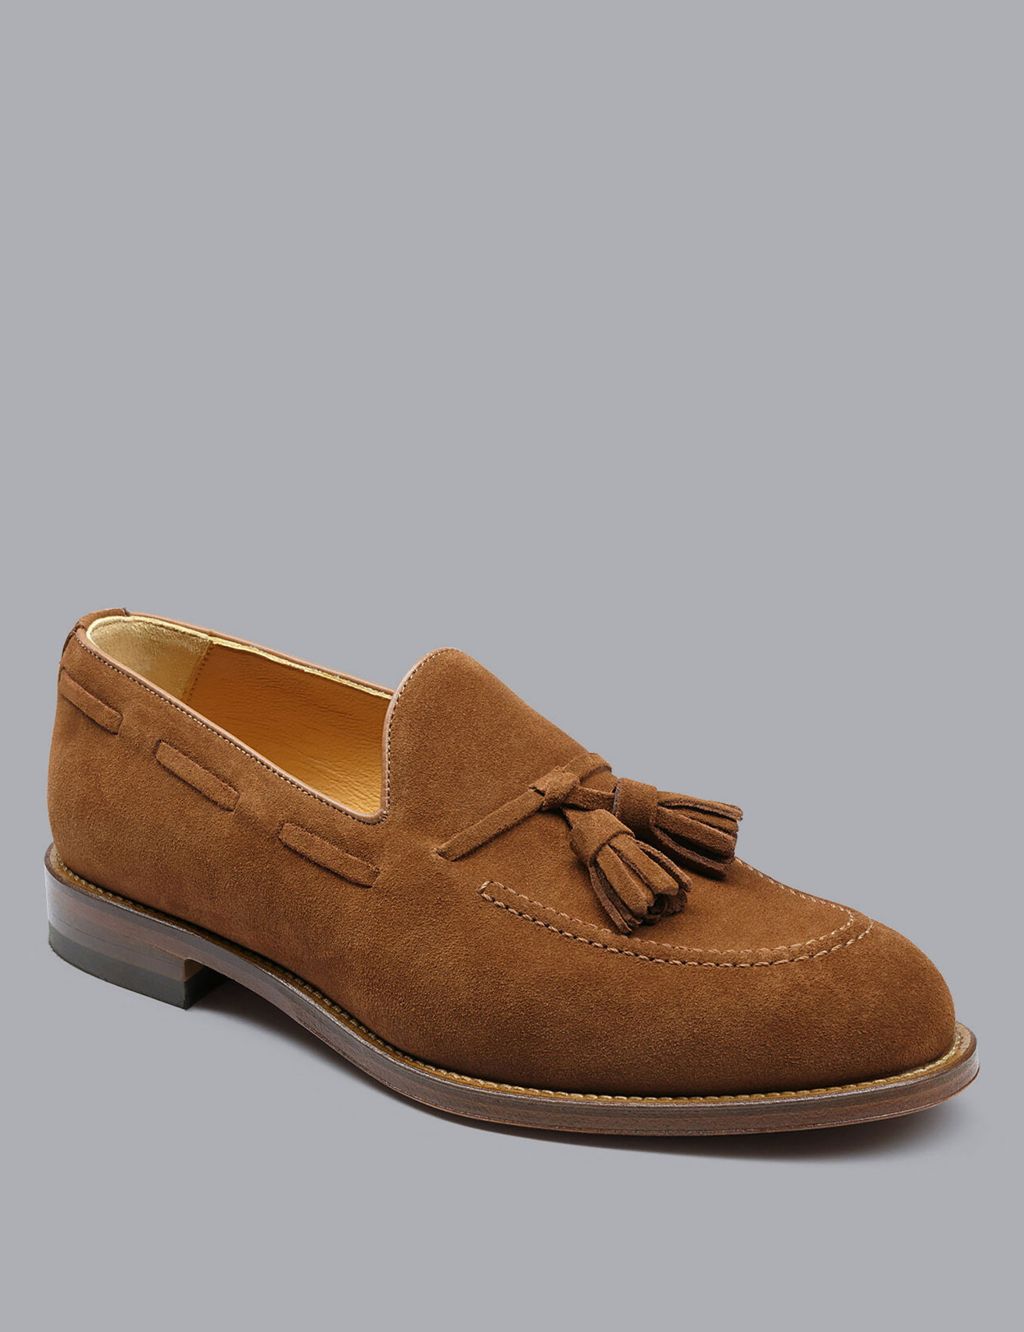 Suede Slip On Loafers image 3